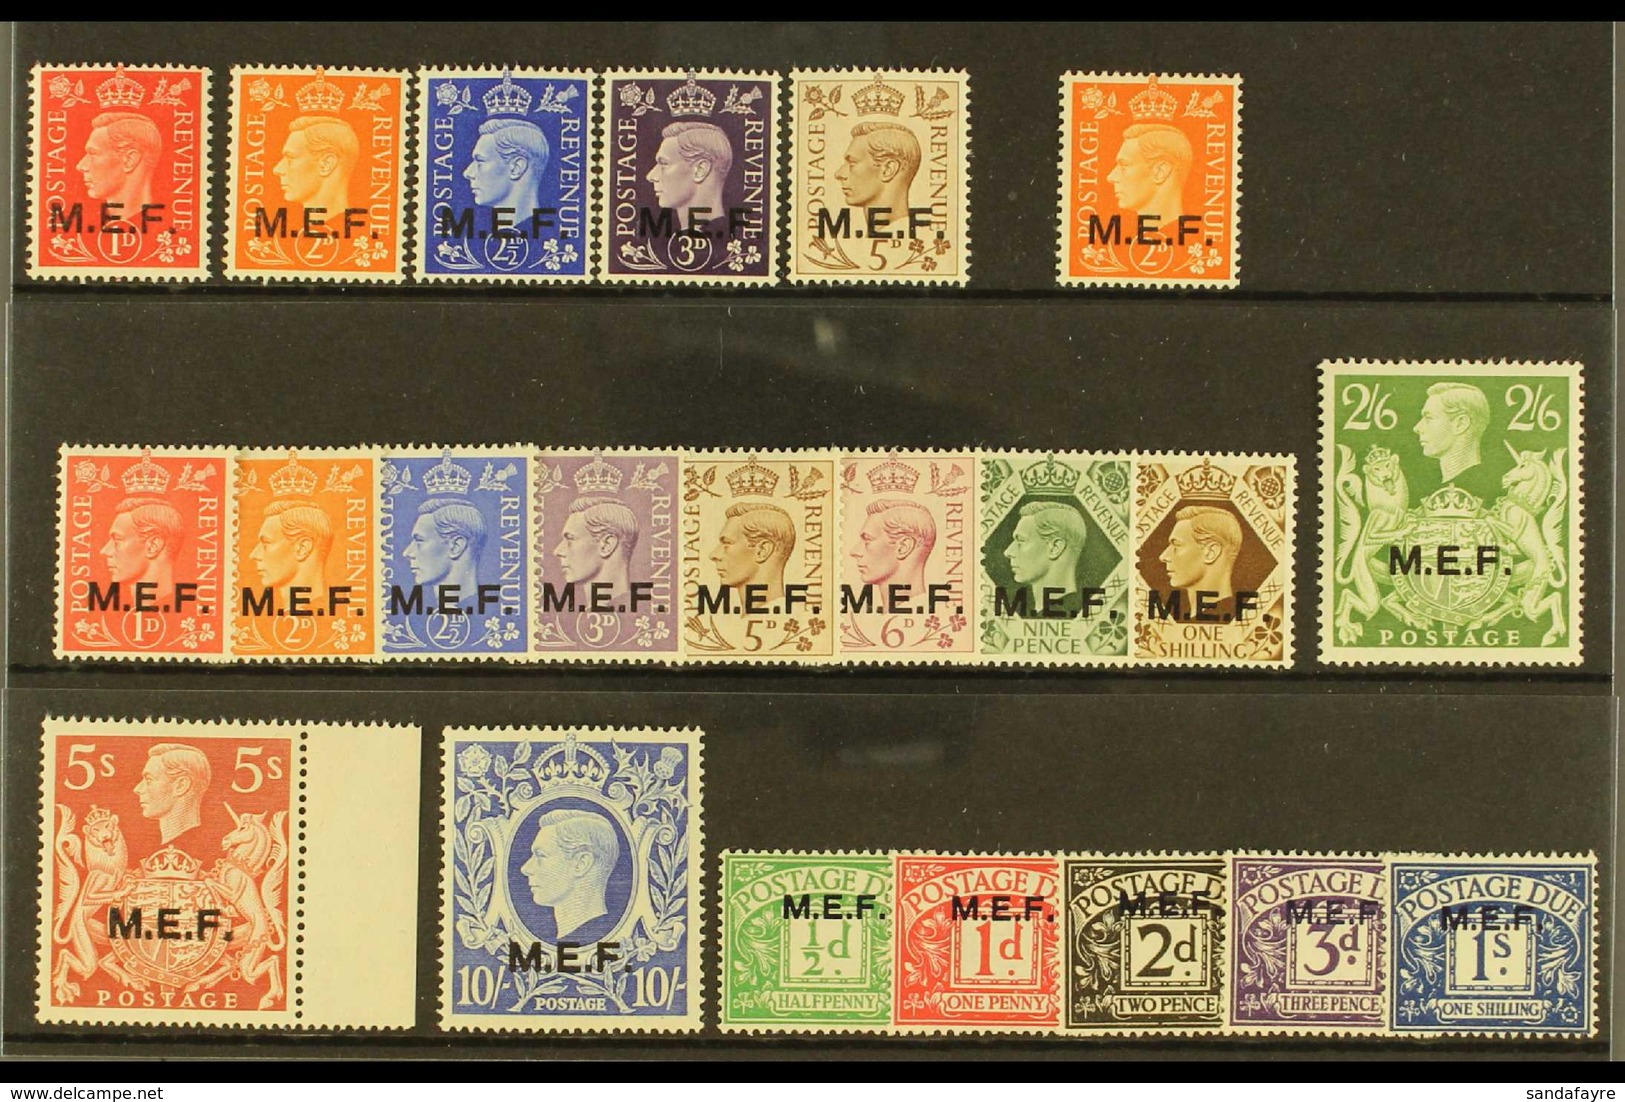 MIDDLE EAST FORCES 1942-47 FINE MINT COLLECTION On A Stock Card That Includes 1942 "Type I" Opt'd Set, "Type II" Opt'd 2 - Italiaans Oost-Afrika